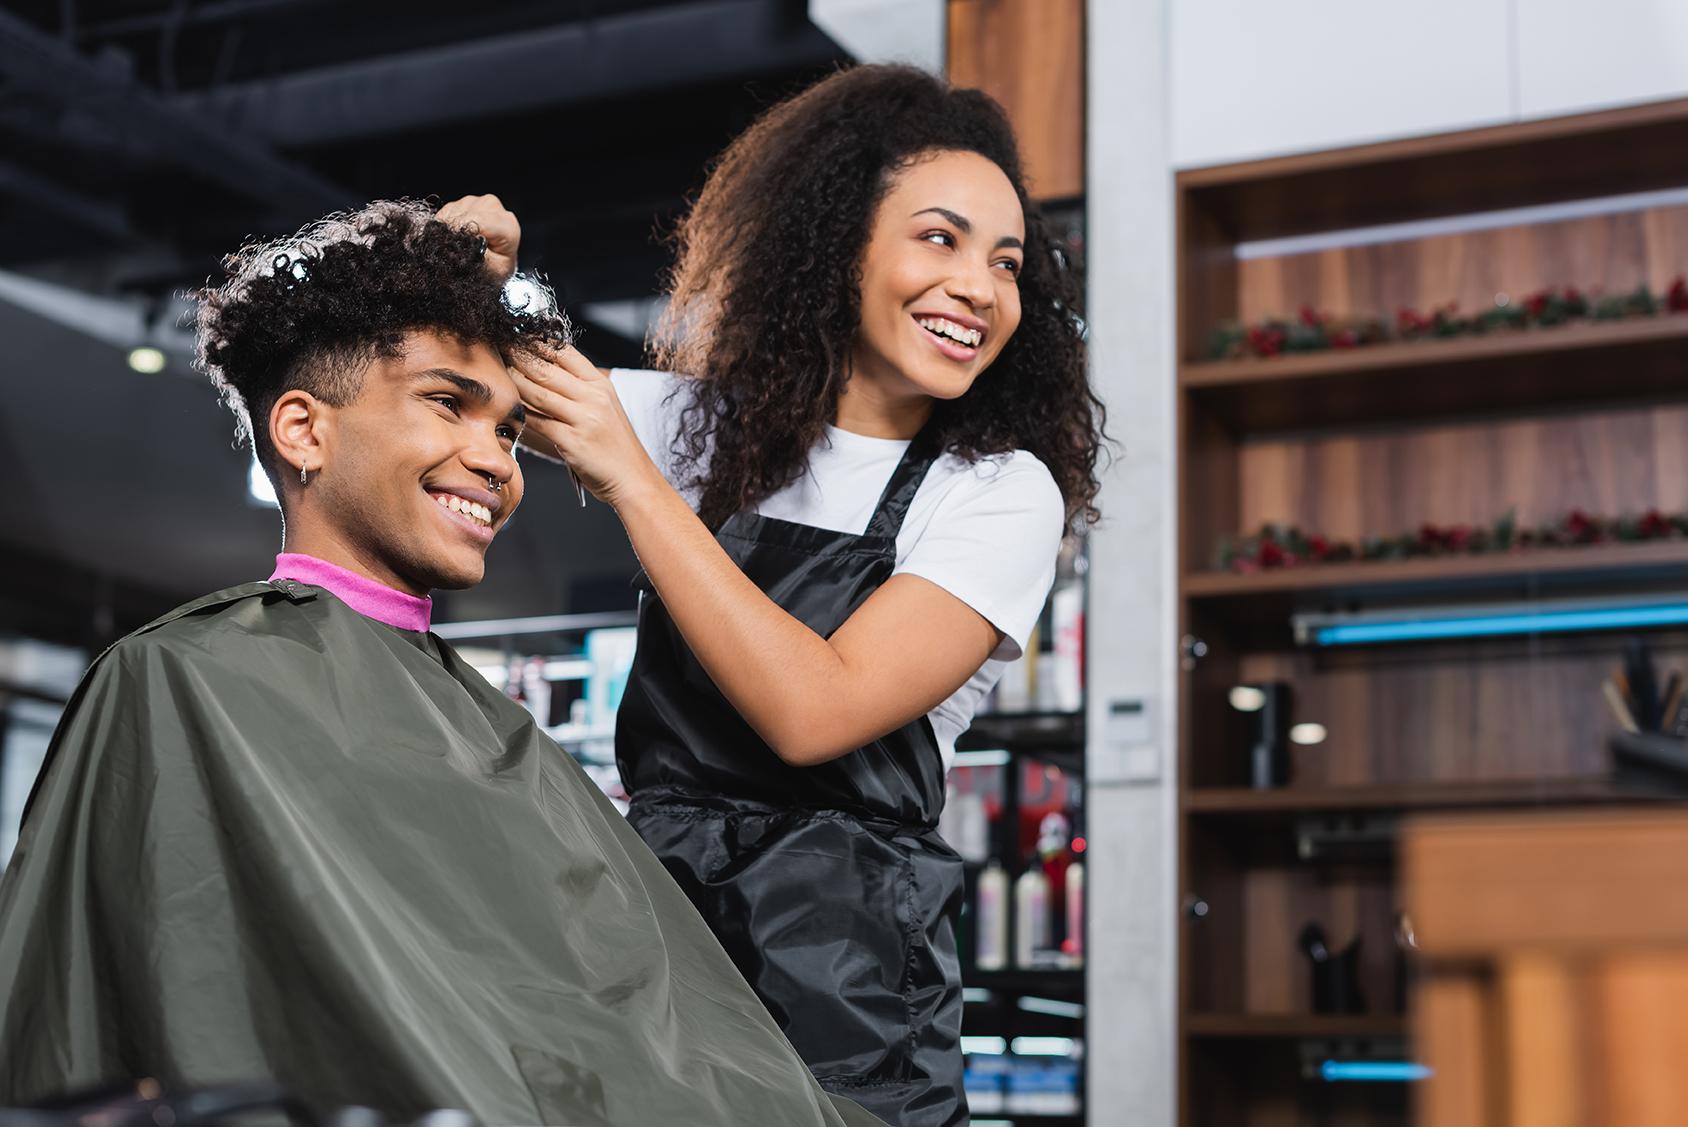 Image of a man getting his hair cut